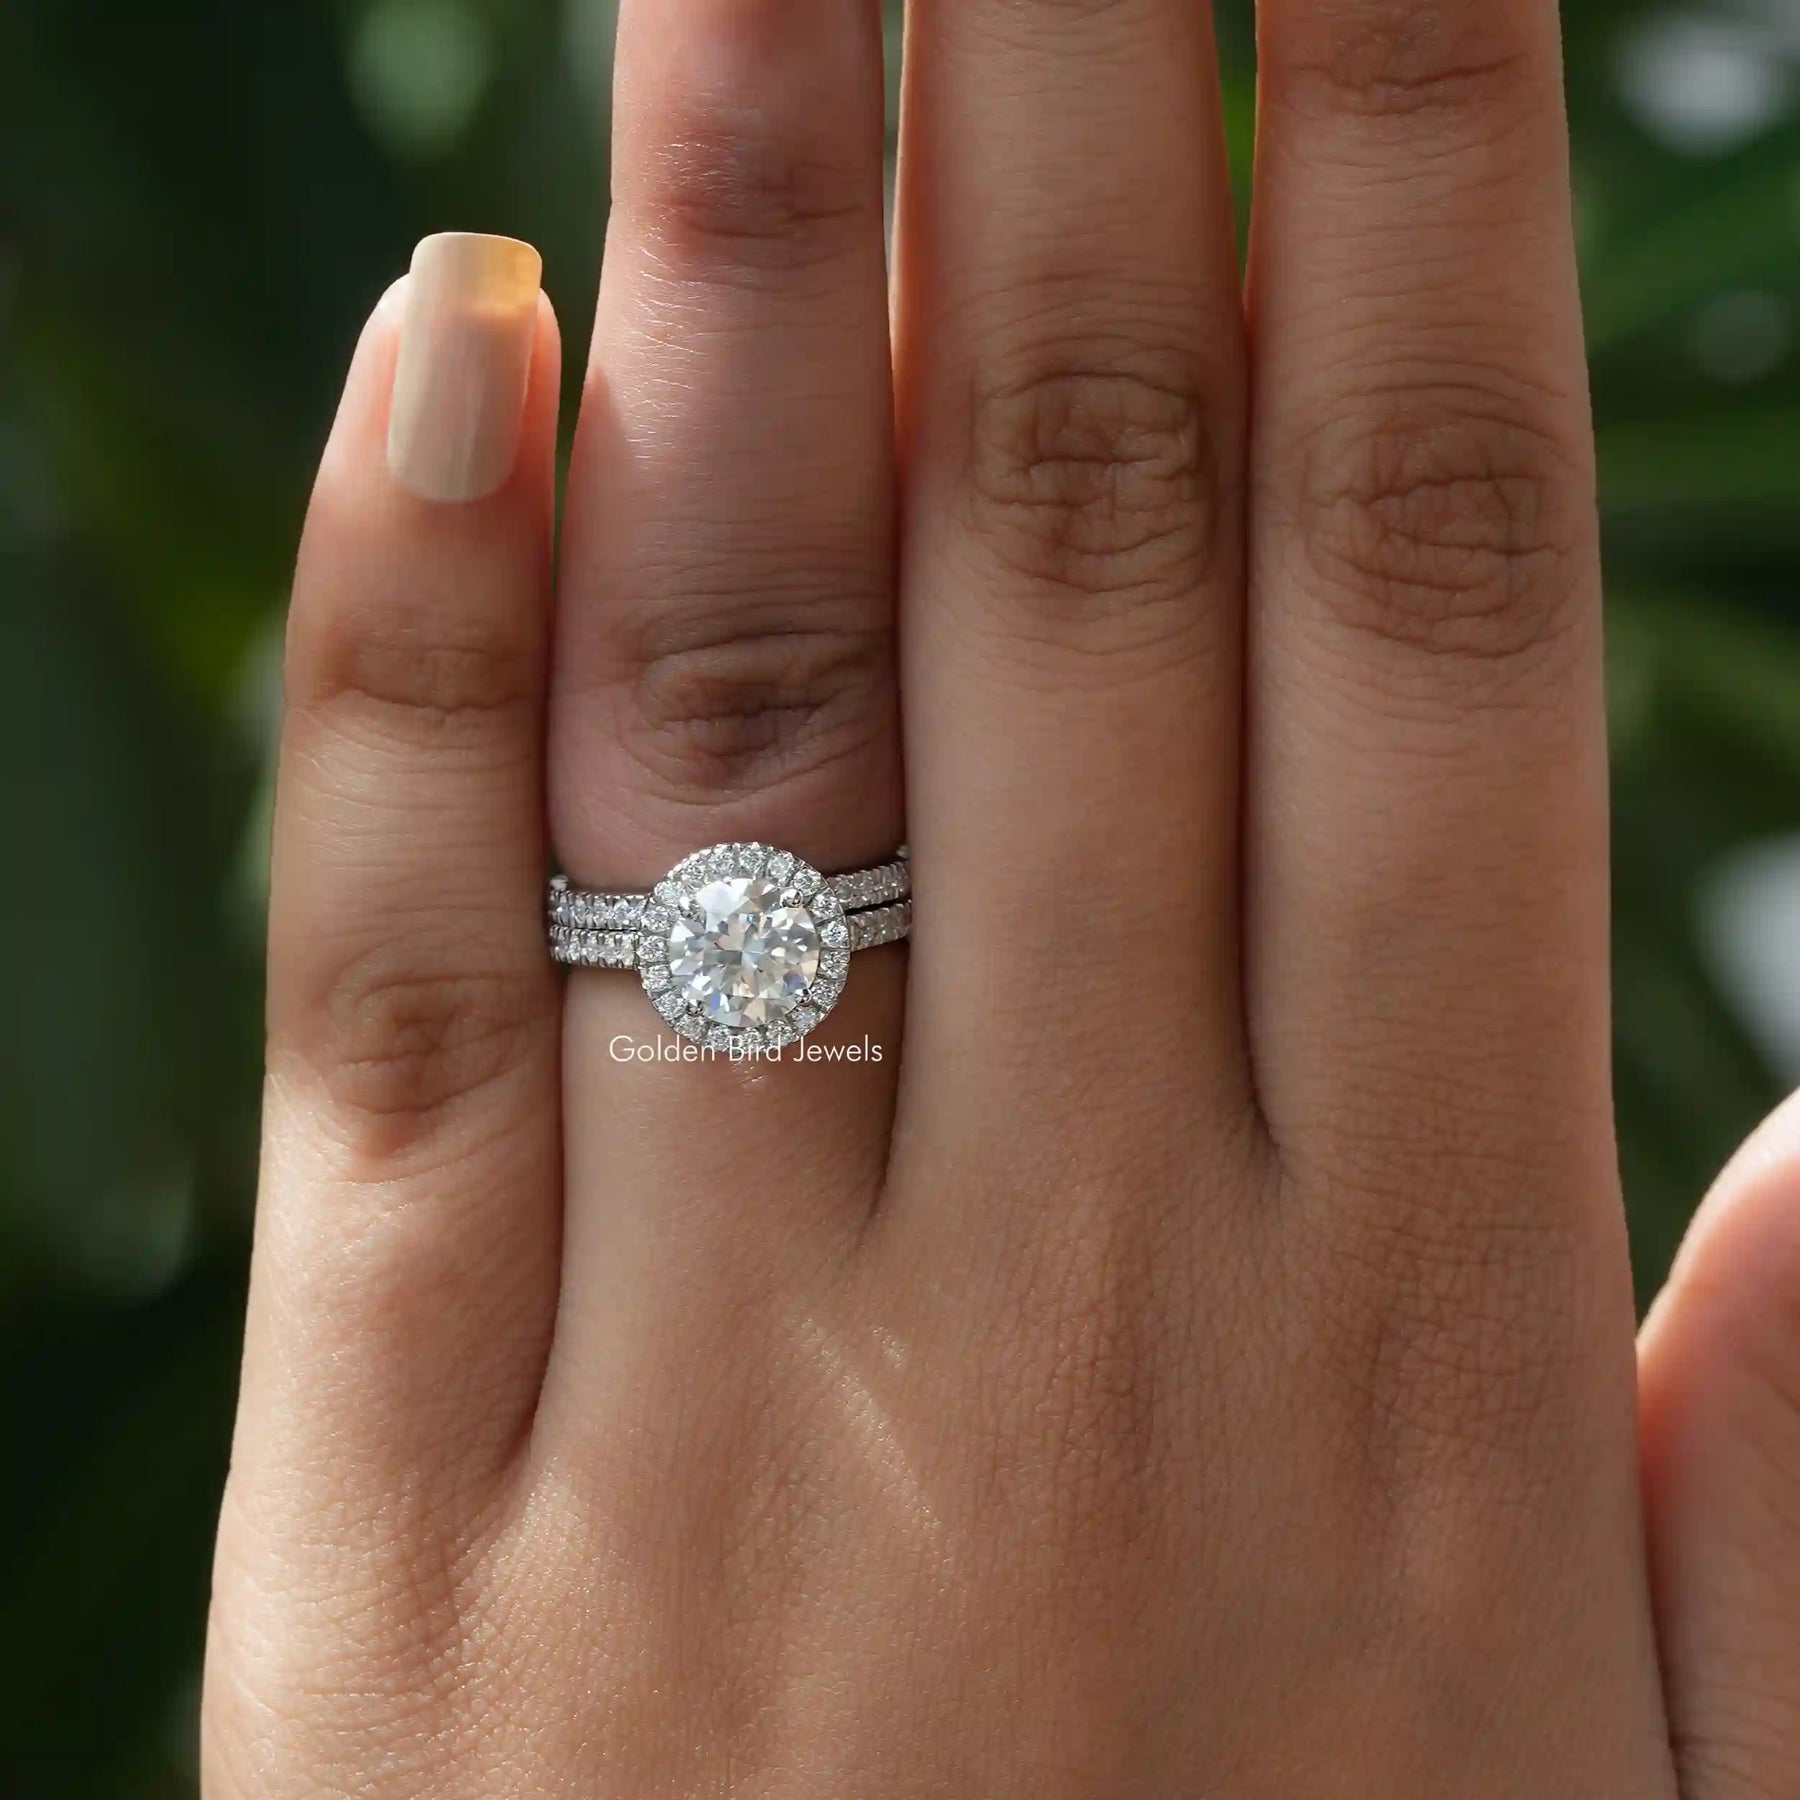 [In Finger Front View Of a Round Moissanite Wedding Ring Set In 18k White Gold]-[Golden Bird Jewels]